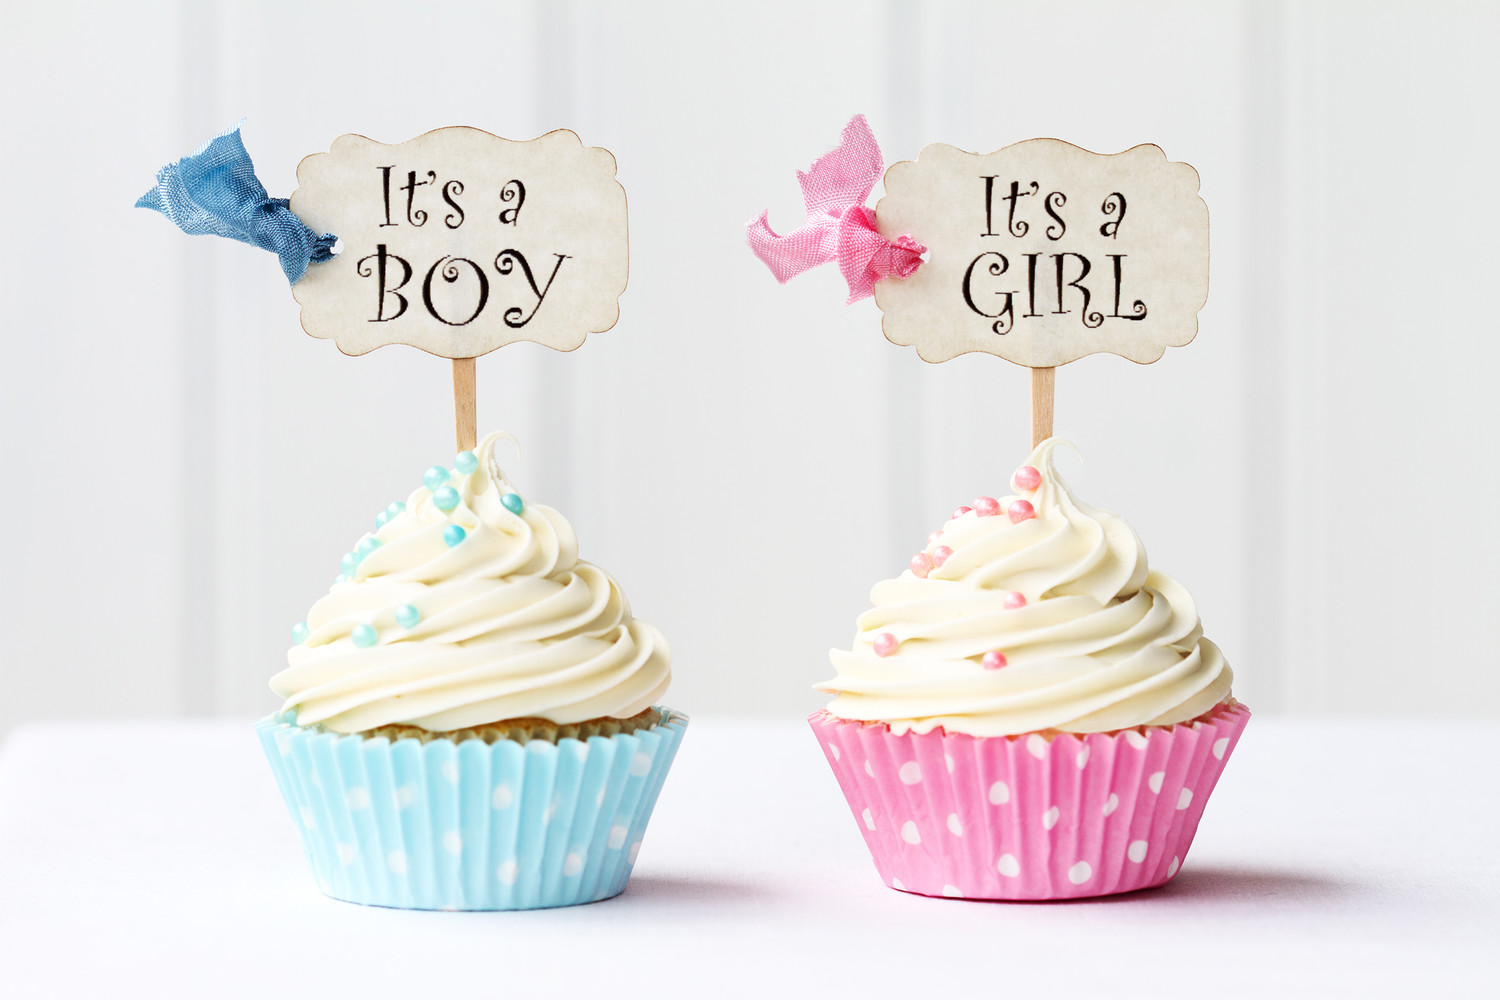 35 Gender Prediction Tests How To Find Out If Its A Boy Or A Girl?